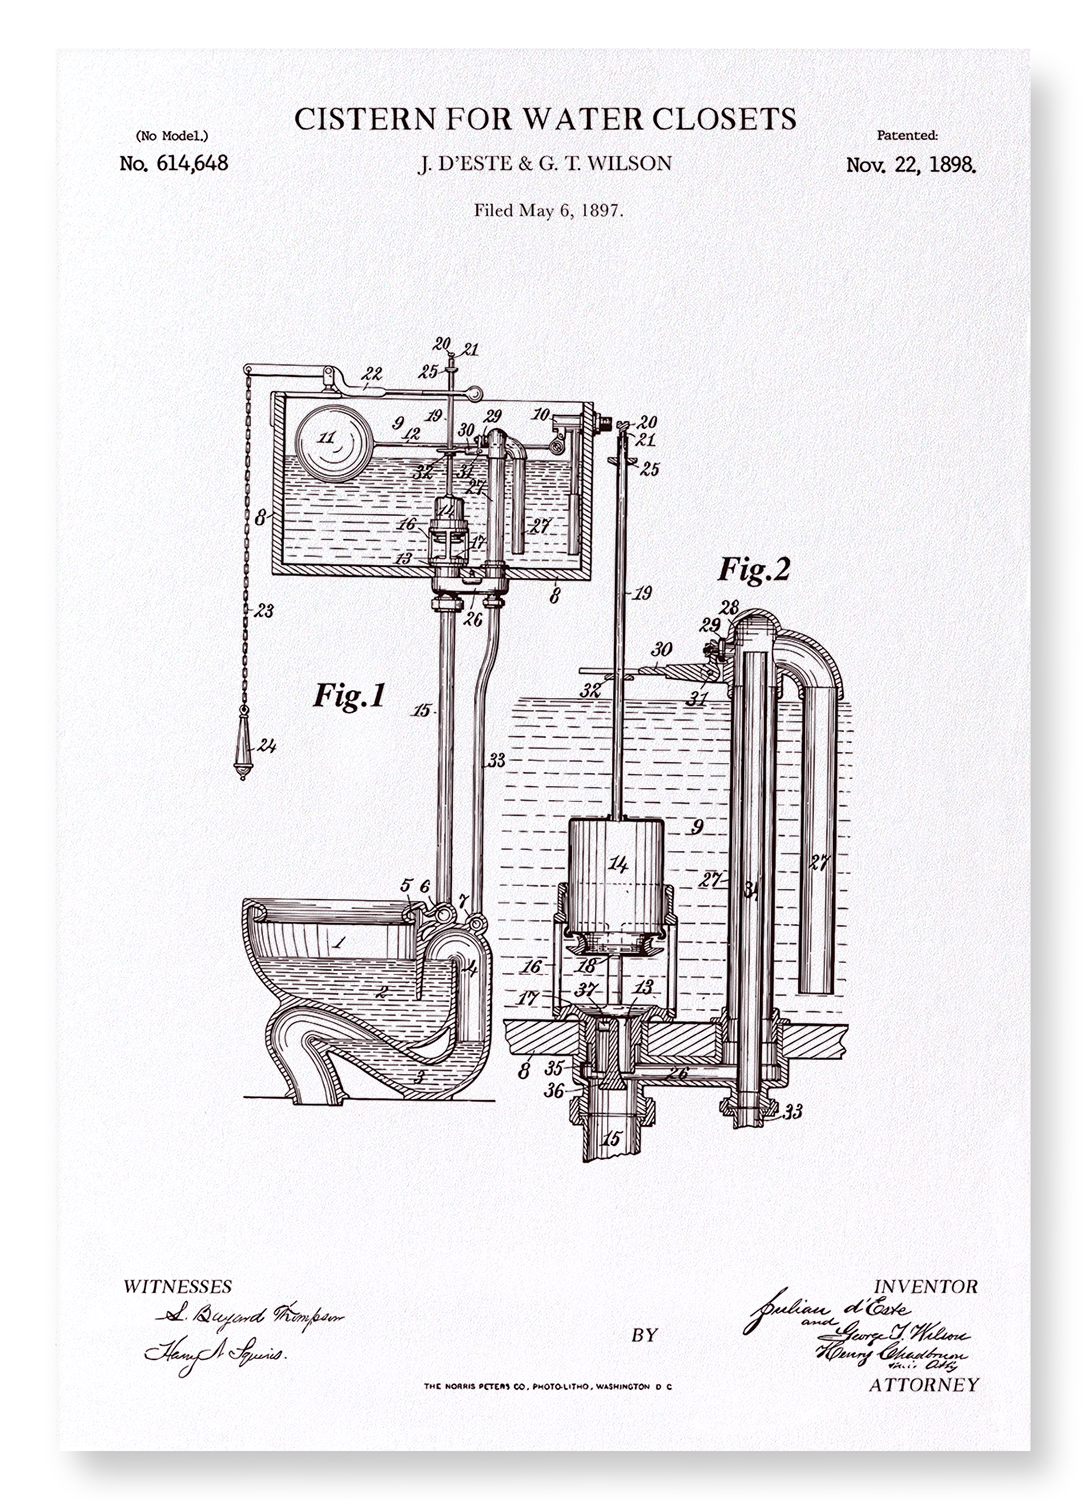 PATENT OF CISTERN FOR WATER CLOSETS (1898)